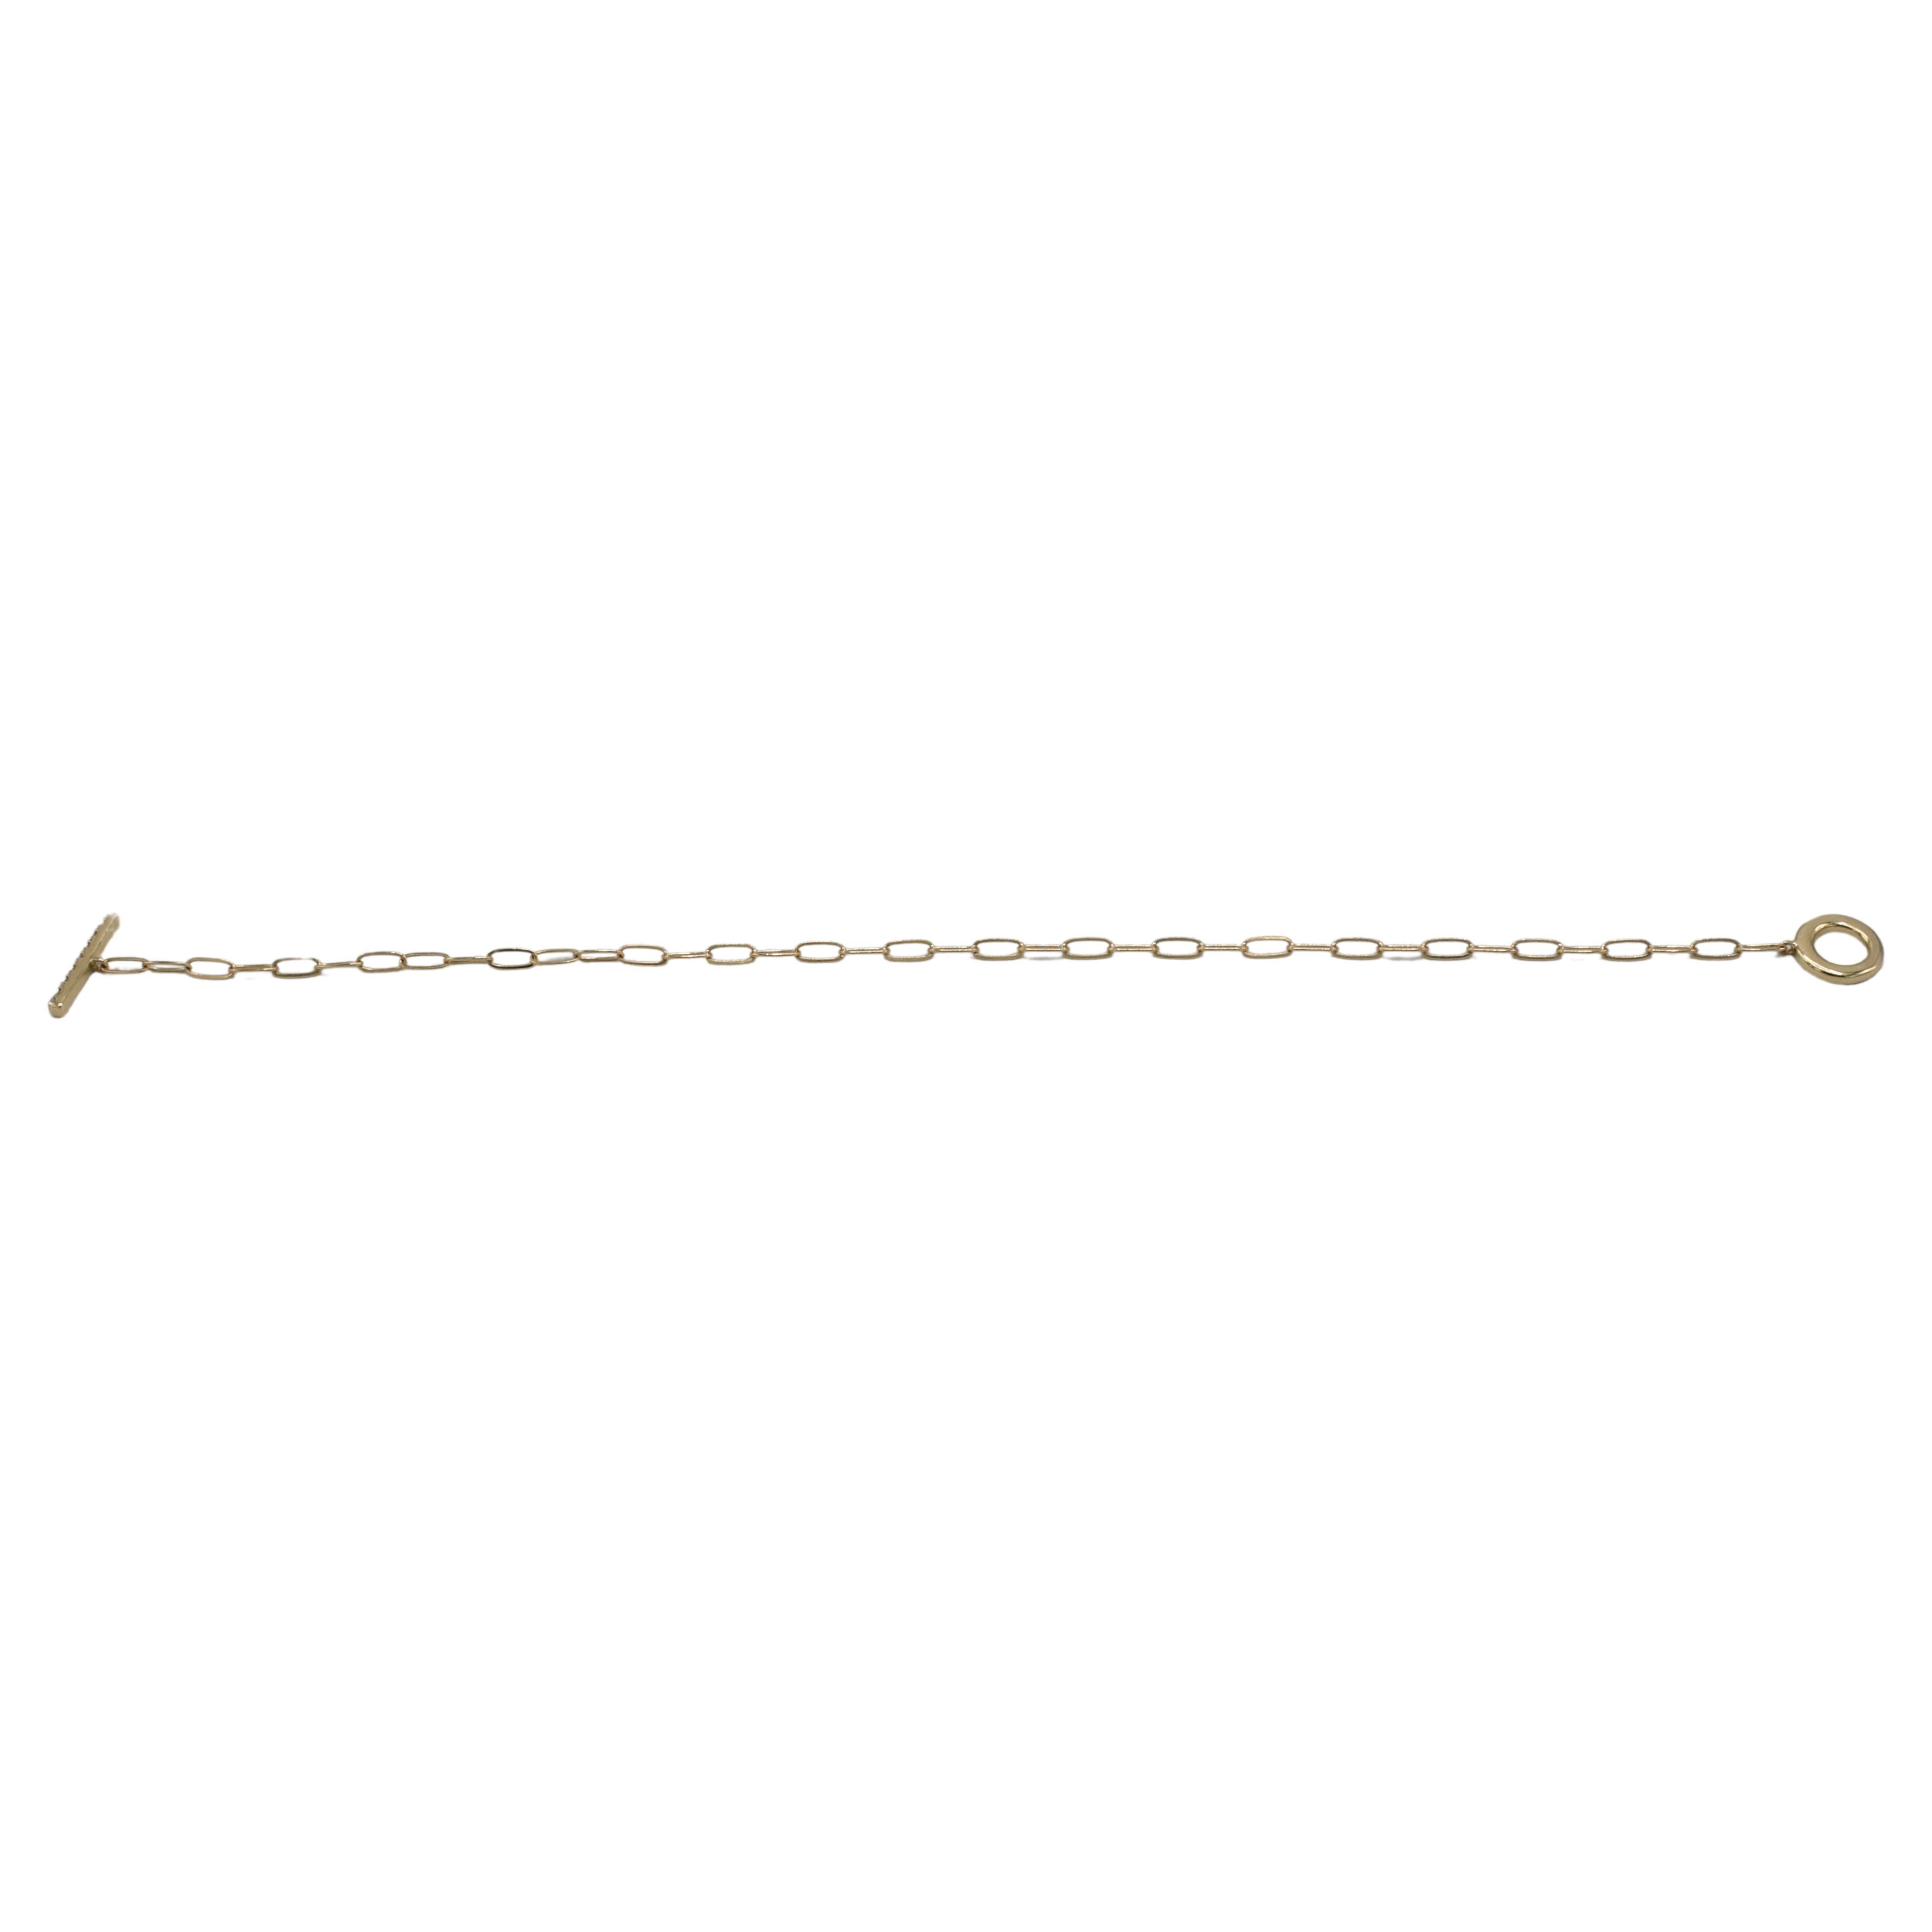 14K Yellow Gold Natural Diamond Paper Clip Chain Link Circle Toggle Bracelet 
Metal: 14k yellow gold
Weight: 1.93 grams
Diamonds: Approx. .10 CTW round G-H SI round natural diamonds
Length: 7 inches

